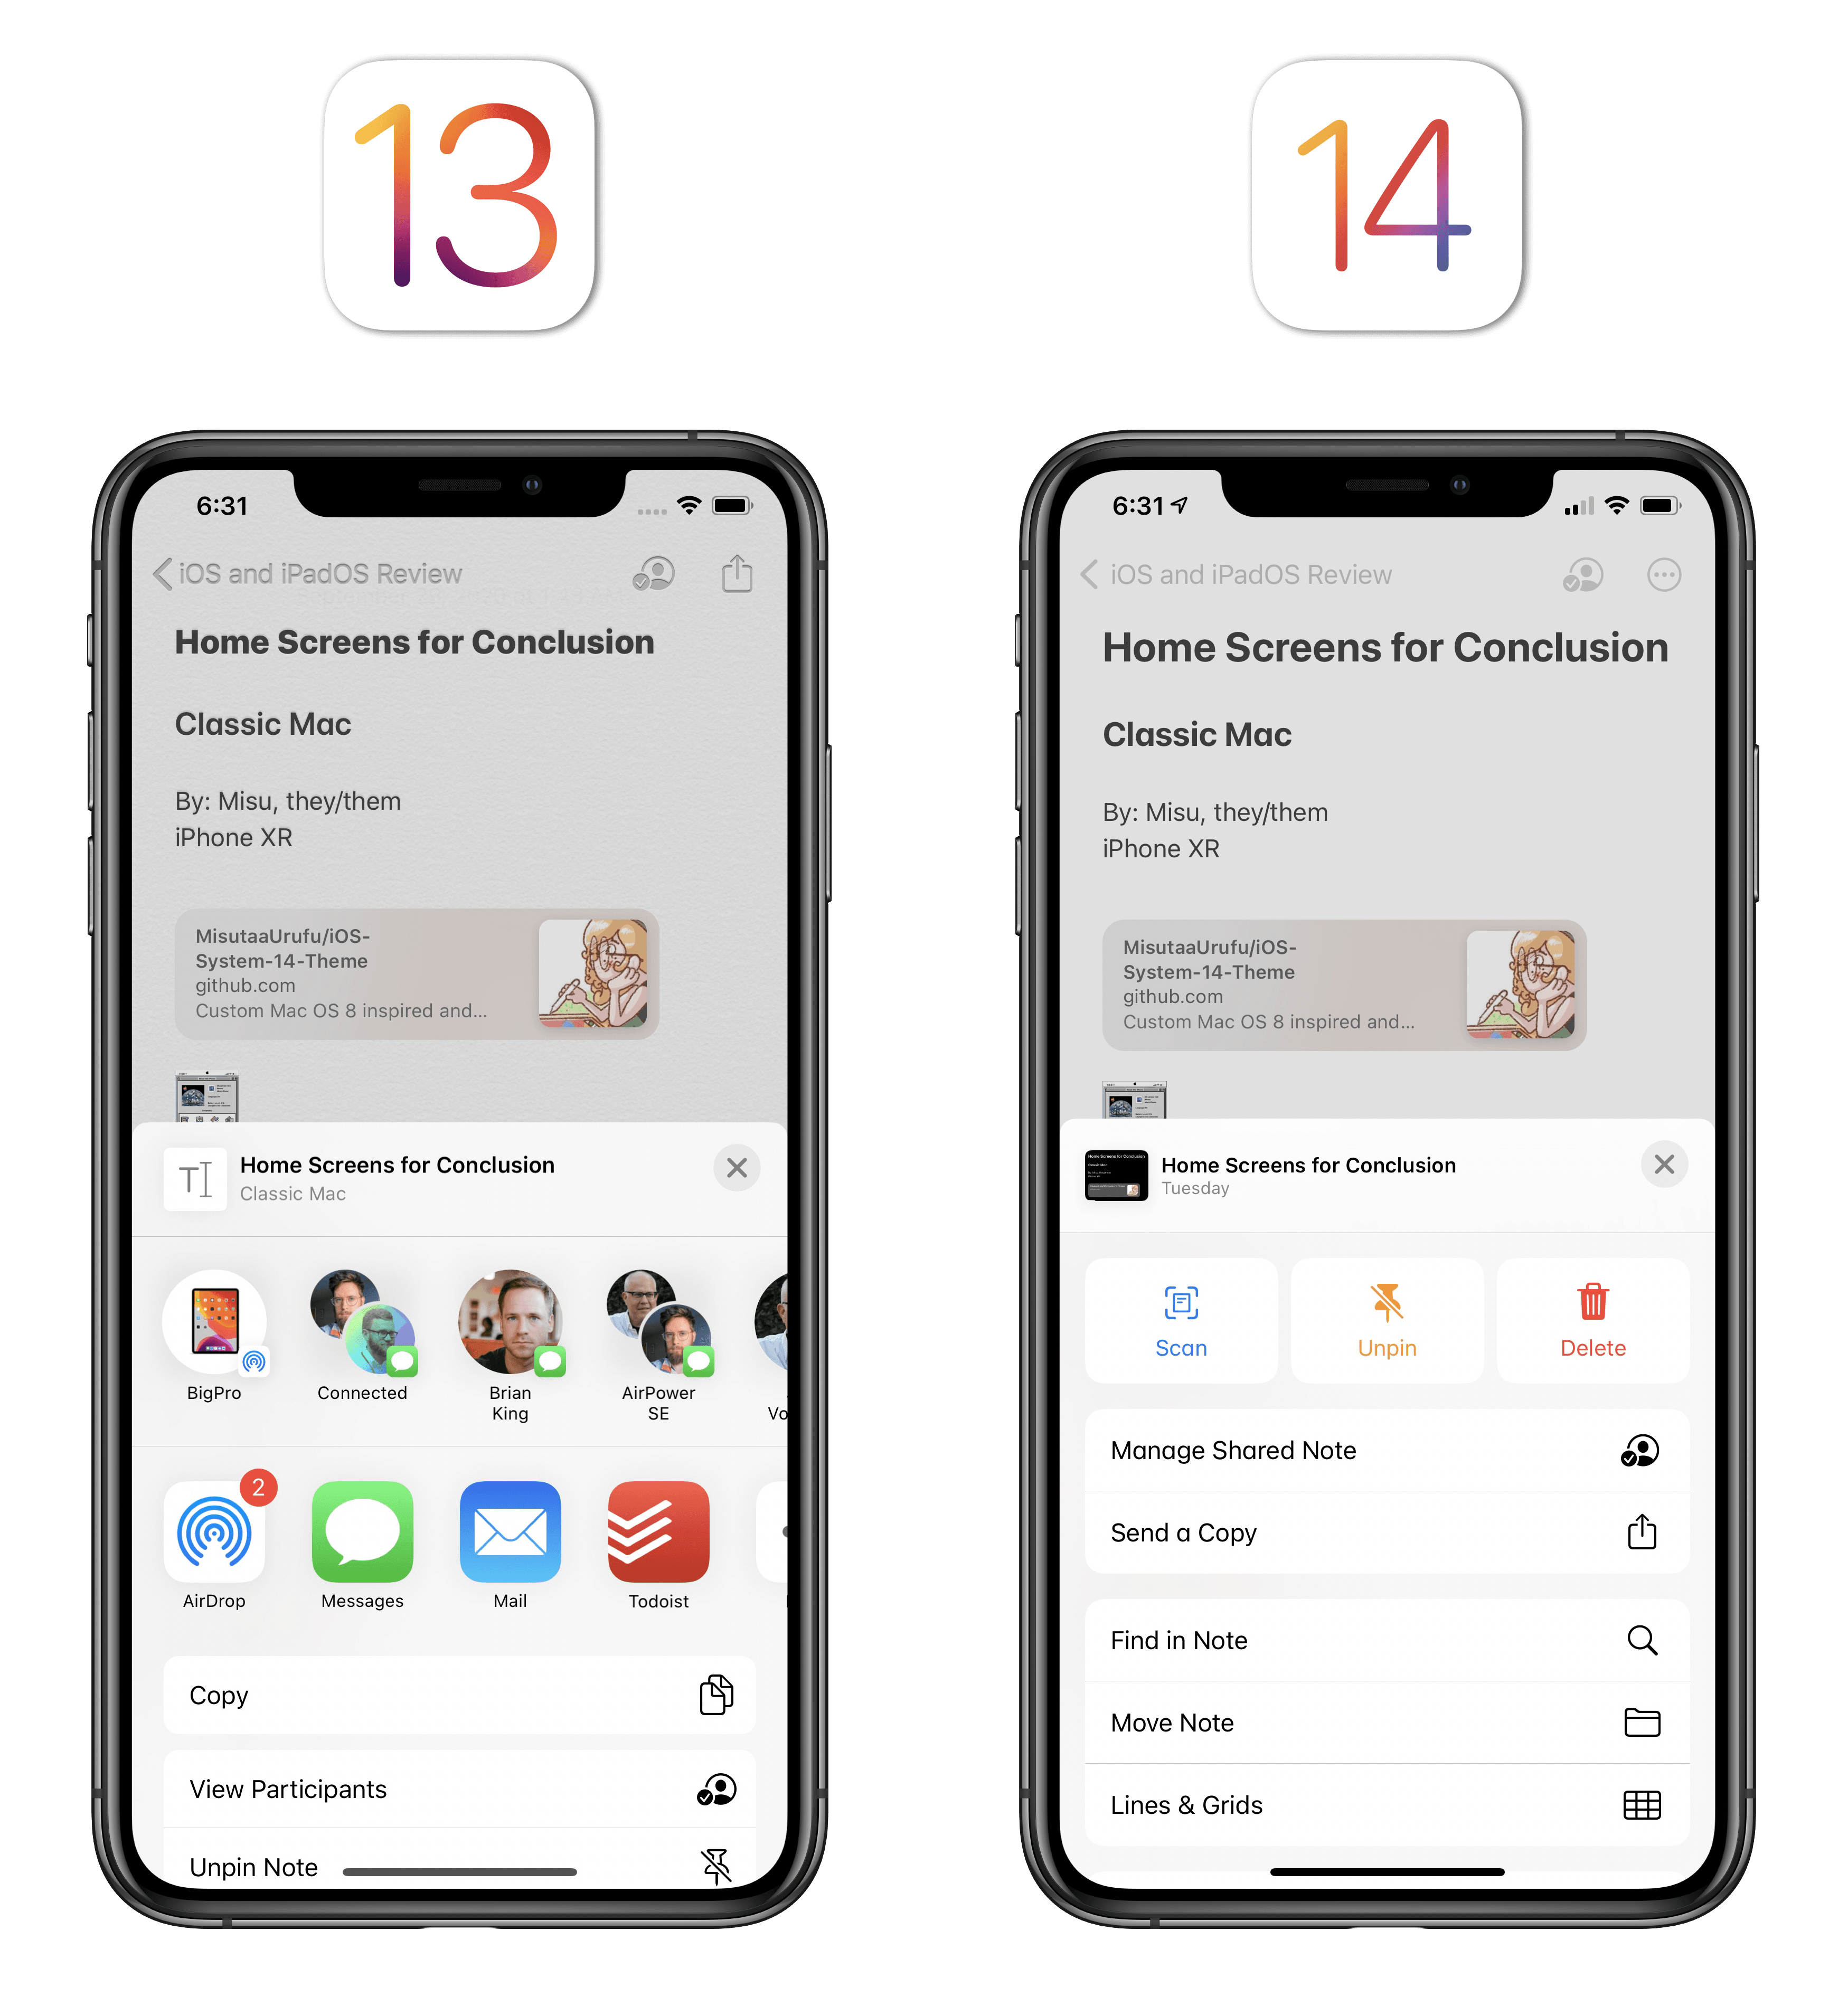 The Notes app in iOS 14 no longer defaults to showing the share sheet when tapping the 'More' button.